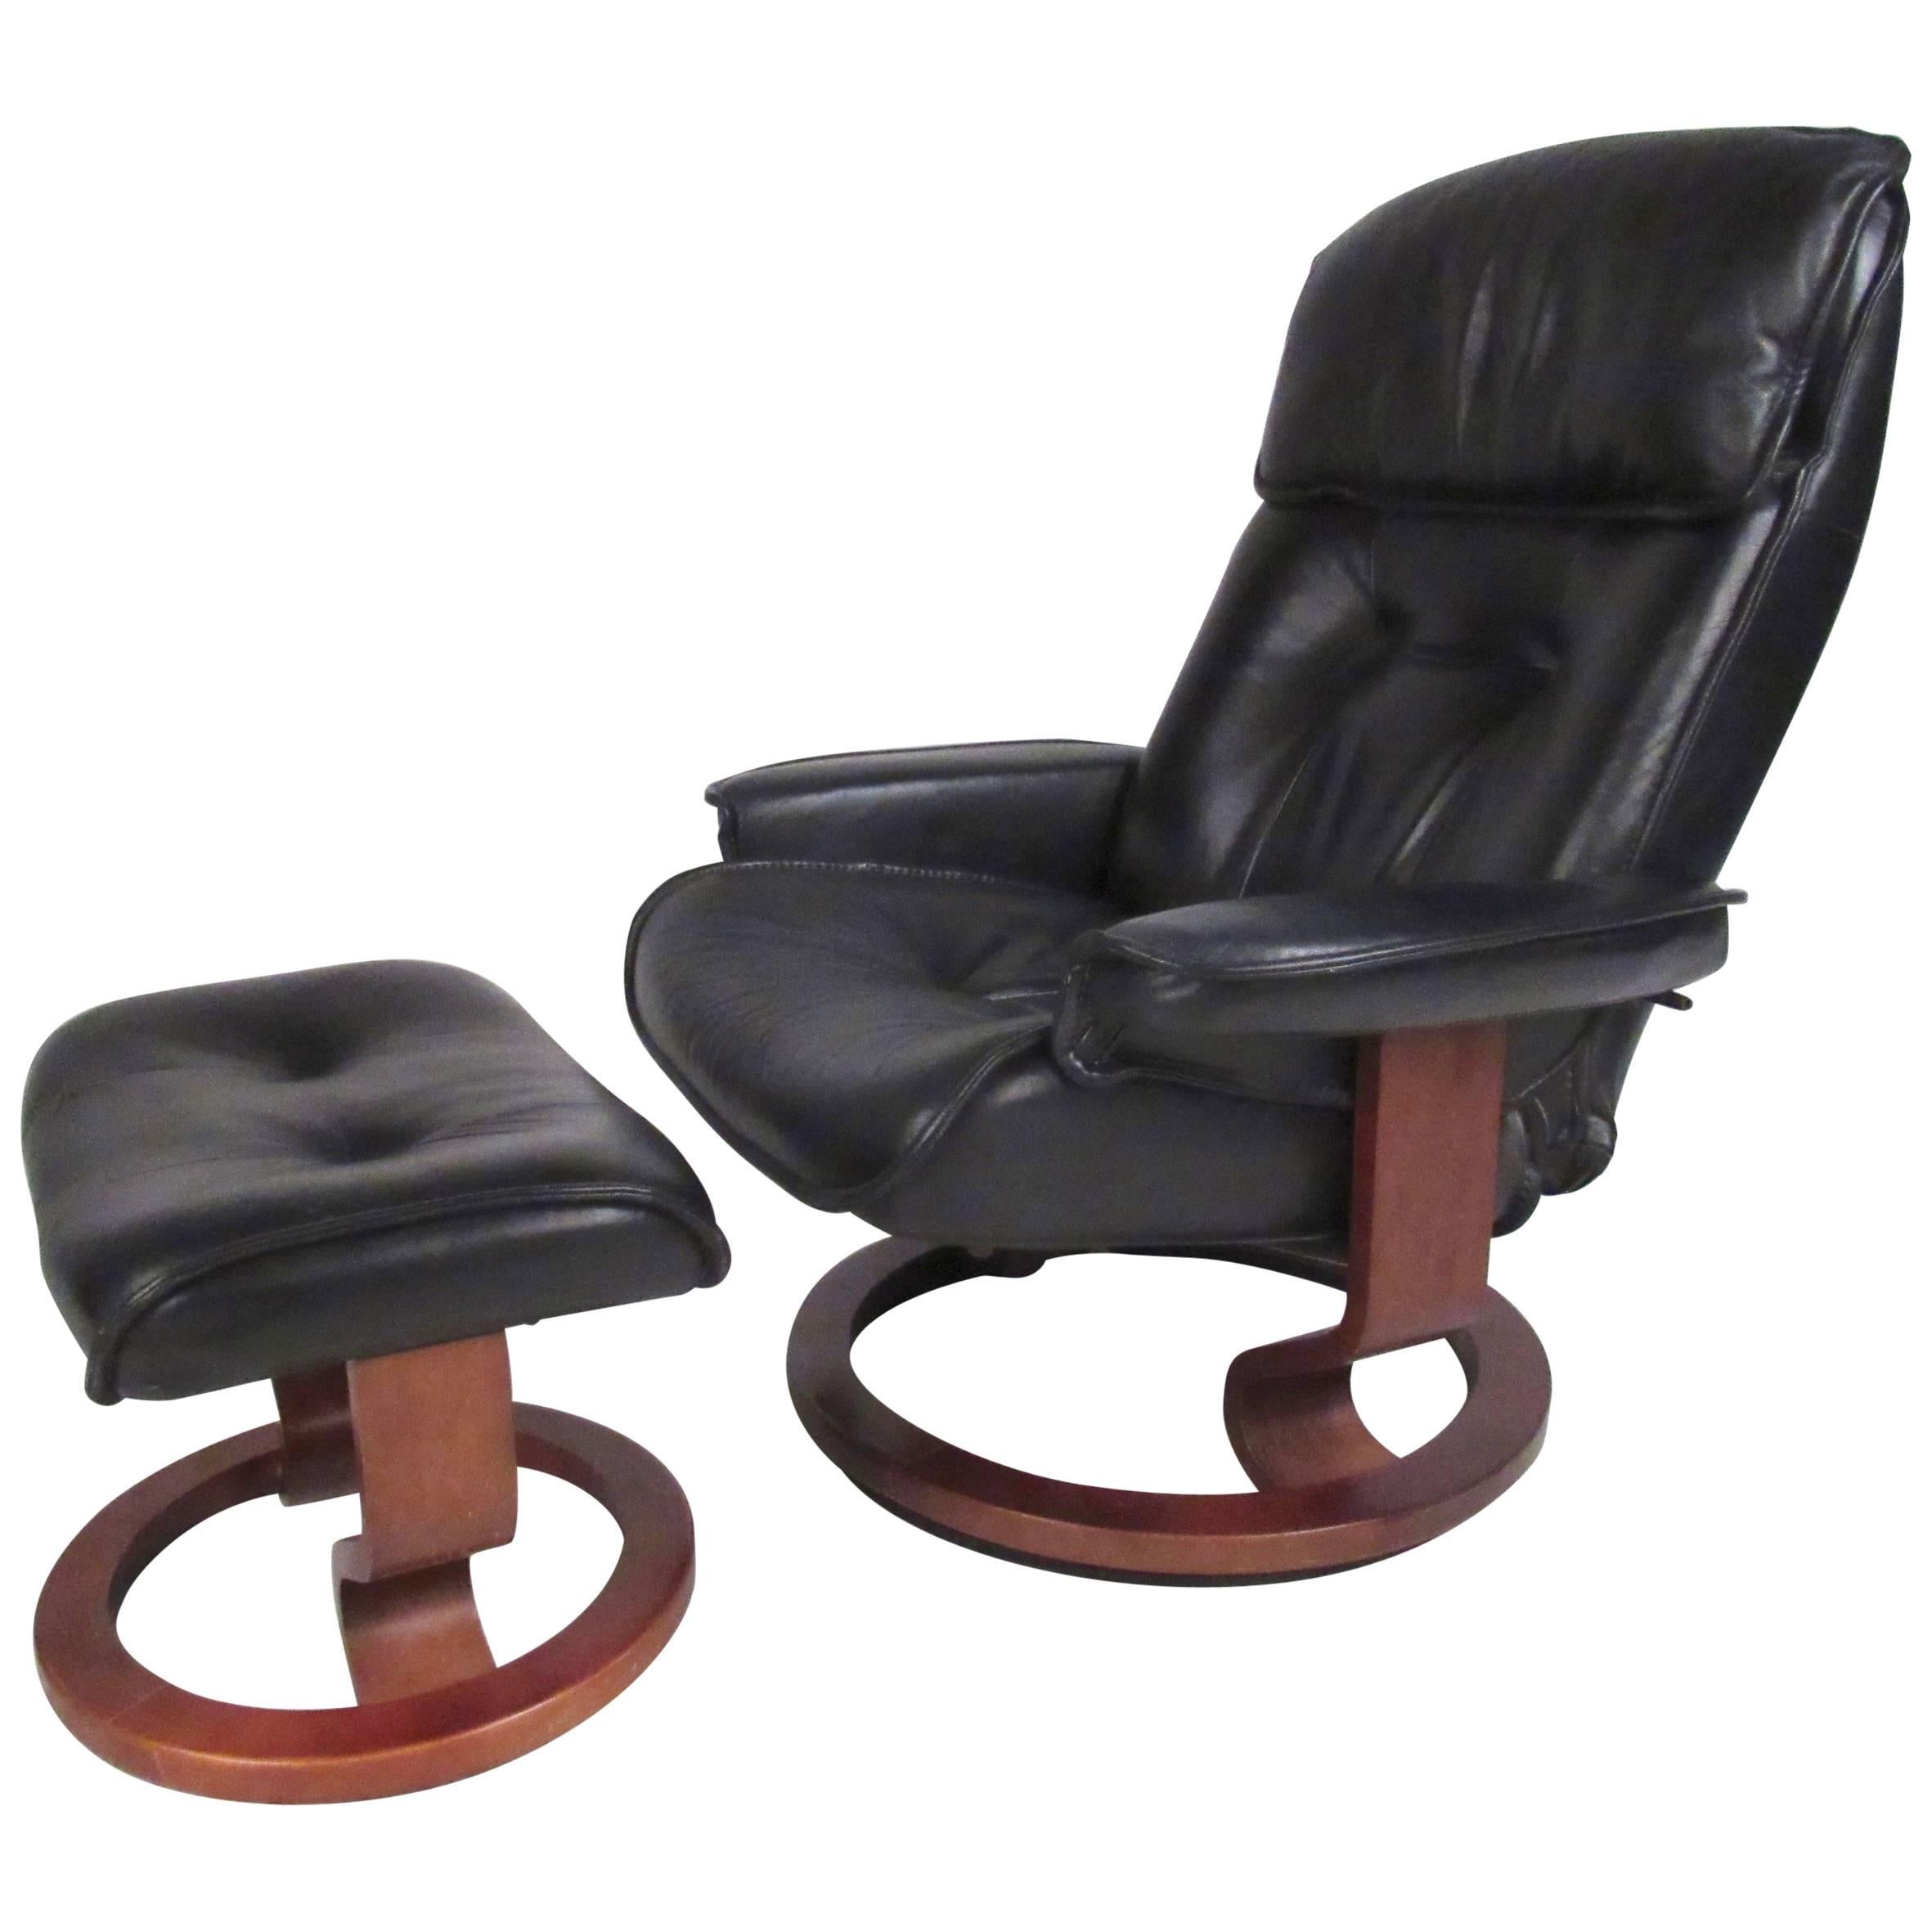 Danish Modern Leather Recliner For, Swivel Recliner Chairs Modern